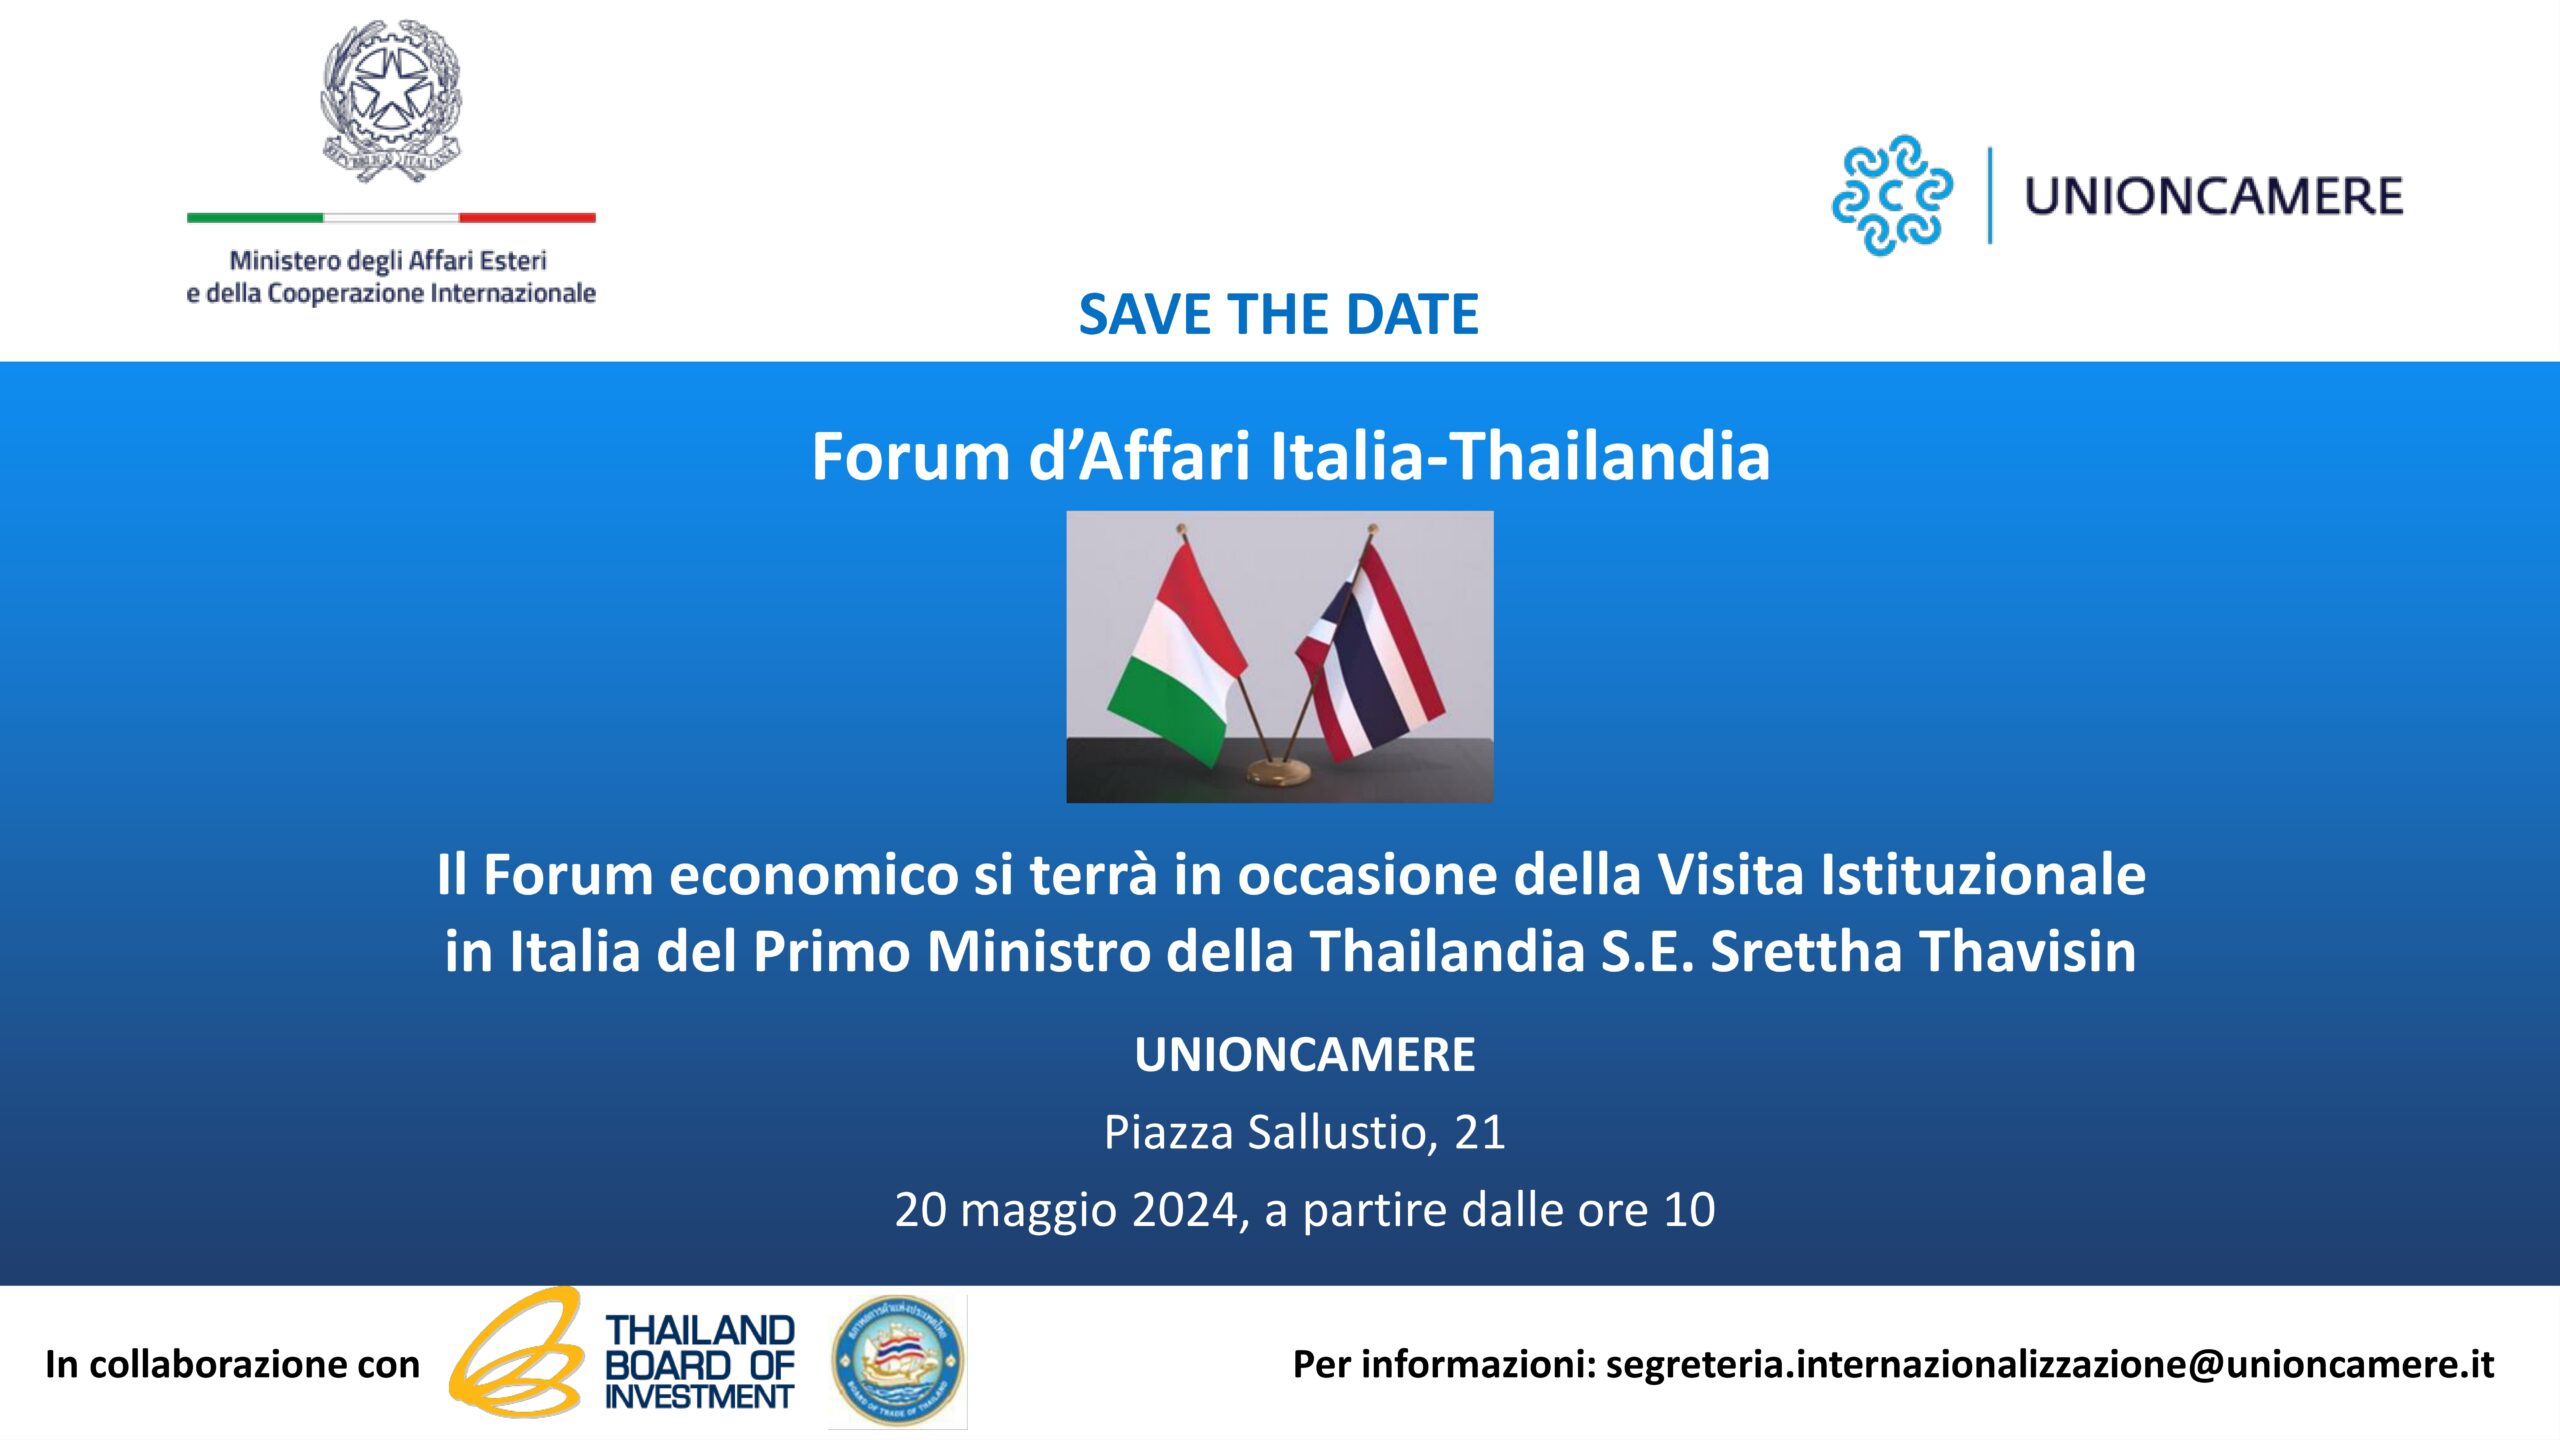 Italy-Thailand Business Forum in Rome on 20 May